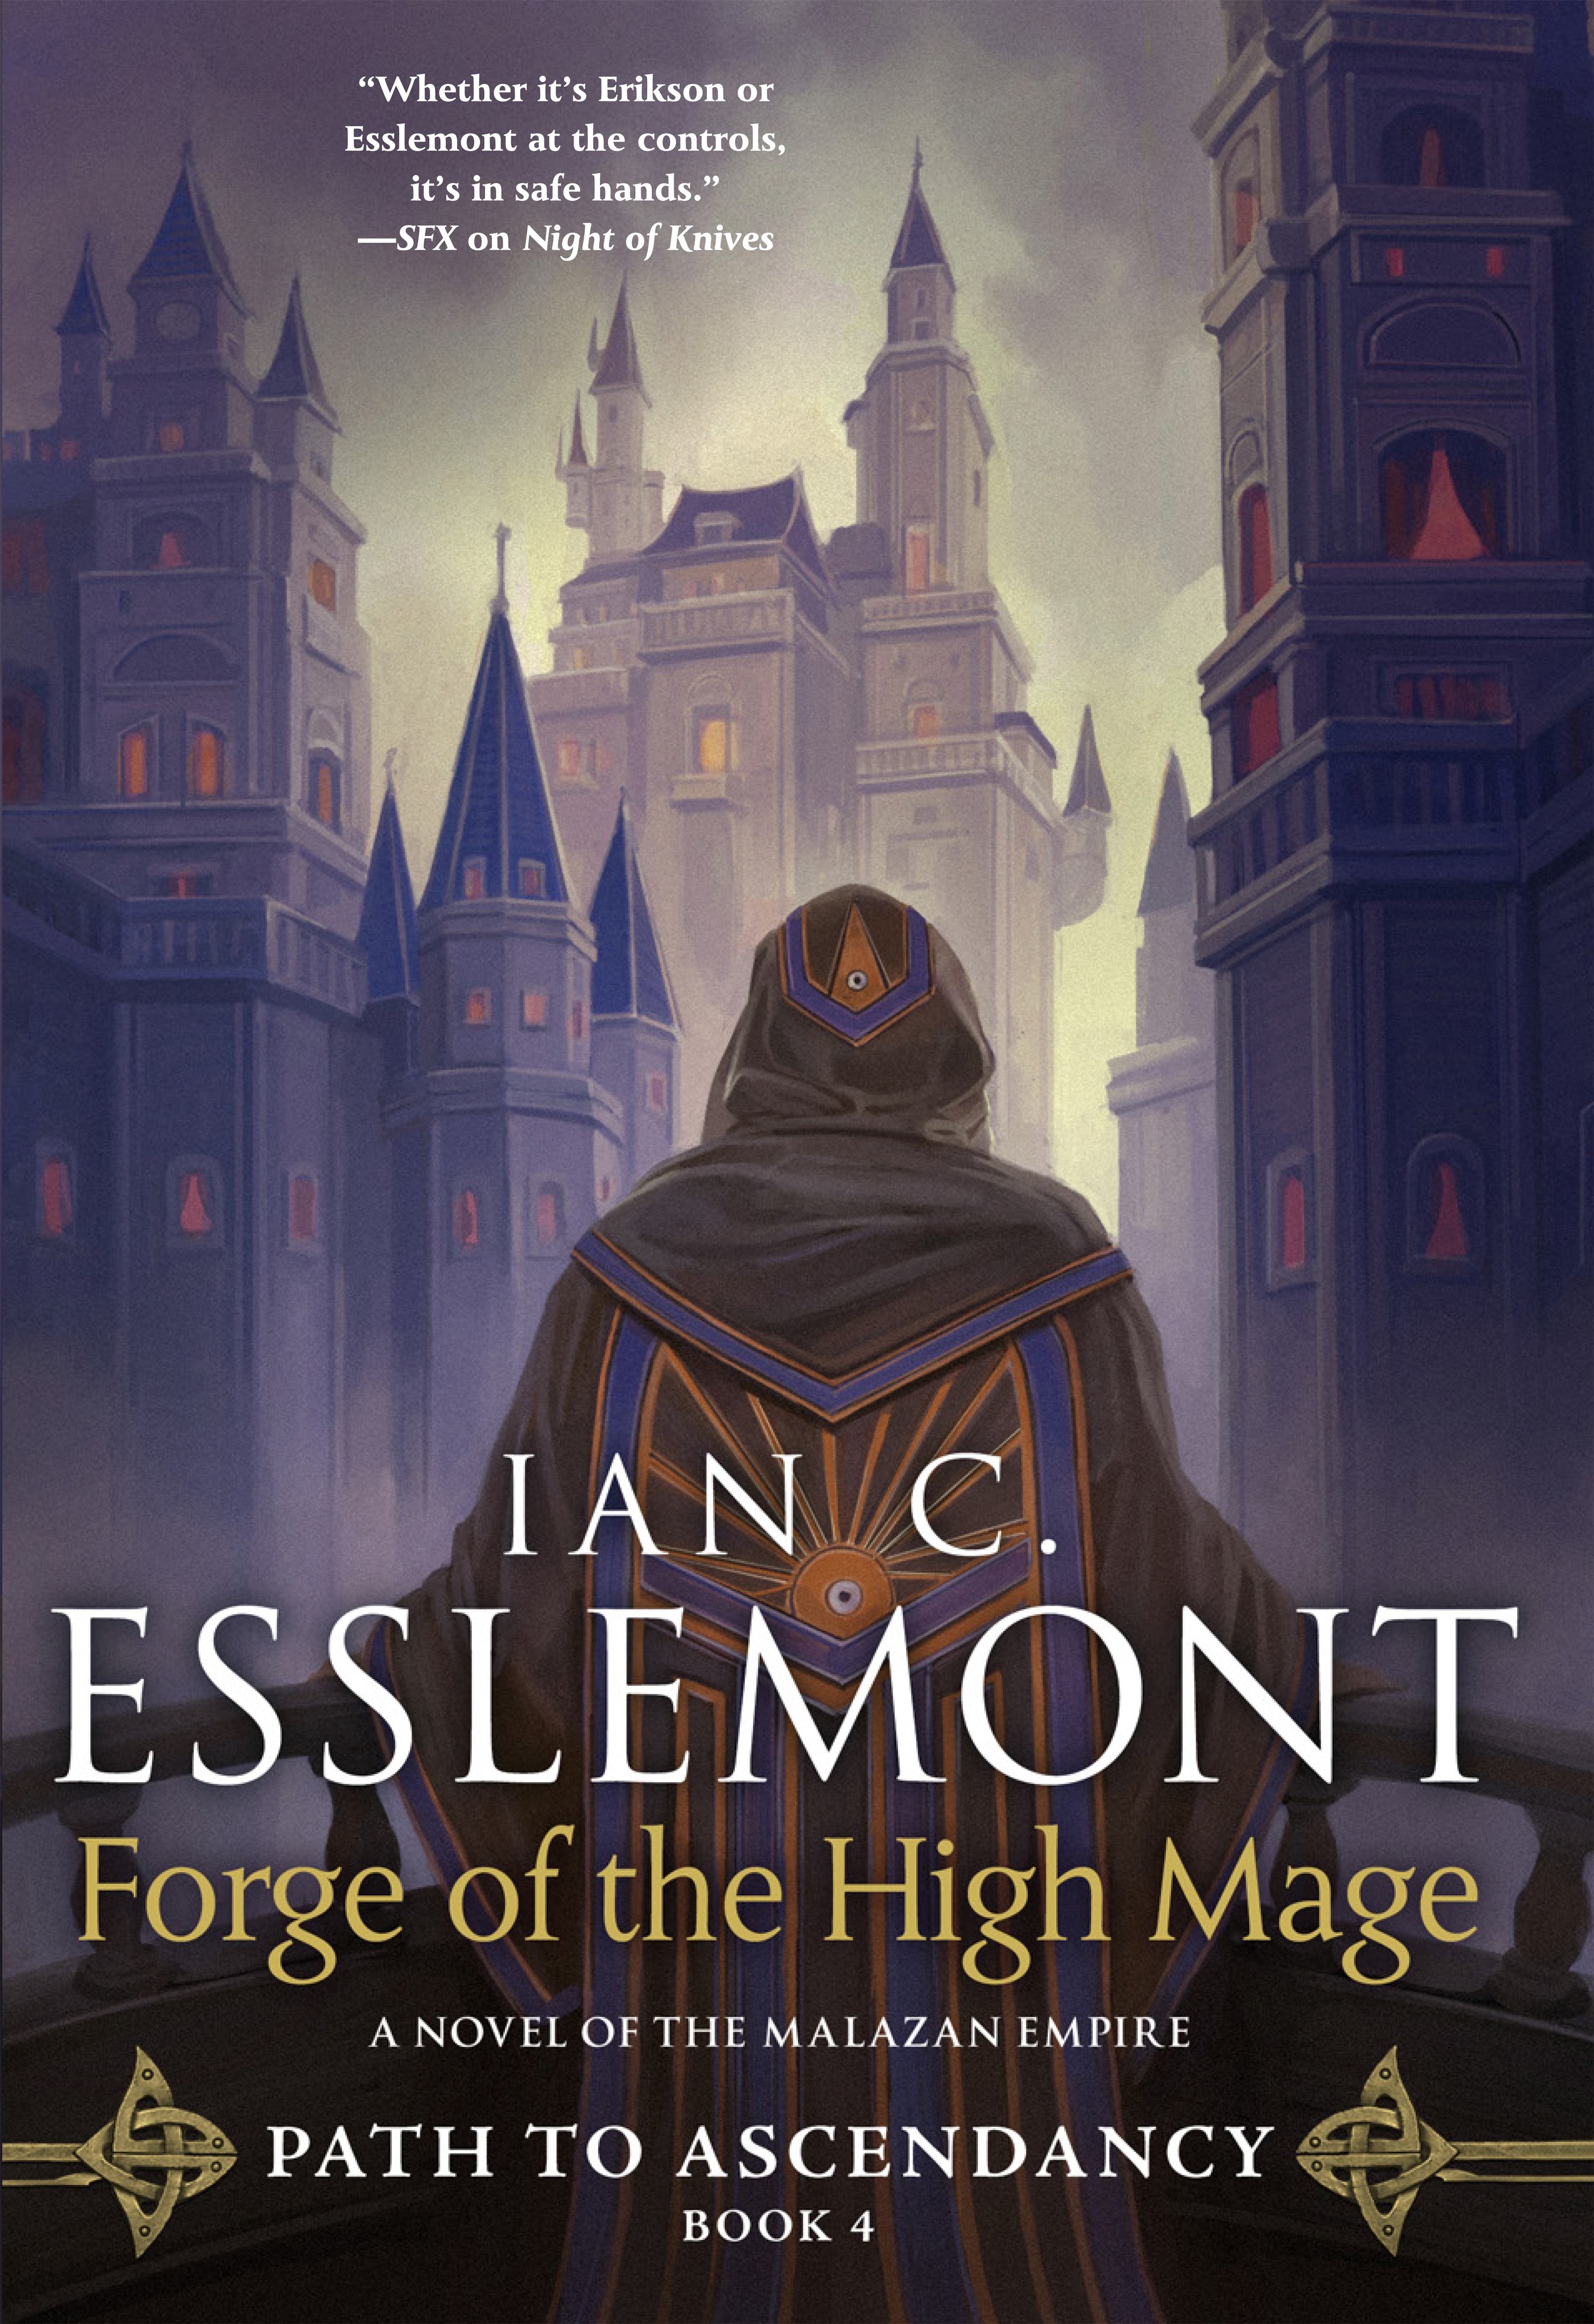 Forge of the High Mage : Path to Ascendancy, Book 4 (A Novel of the Malazan Empire) by Ian C. Esslemont